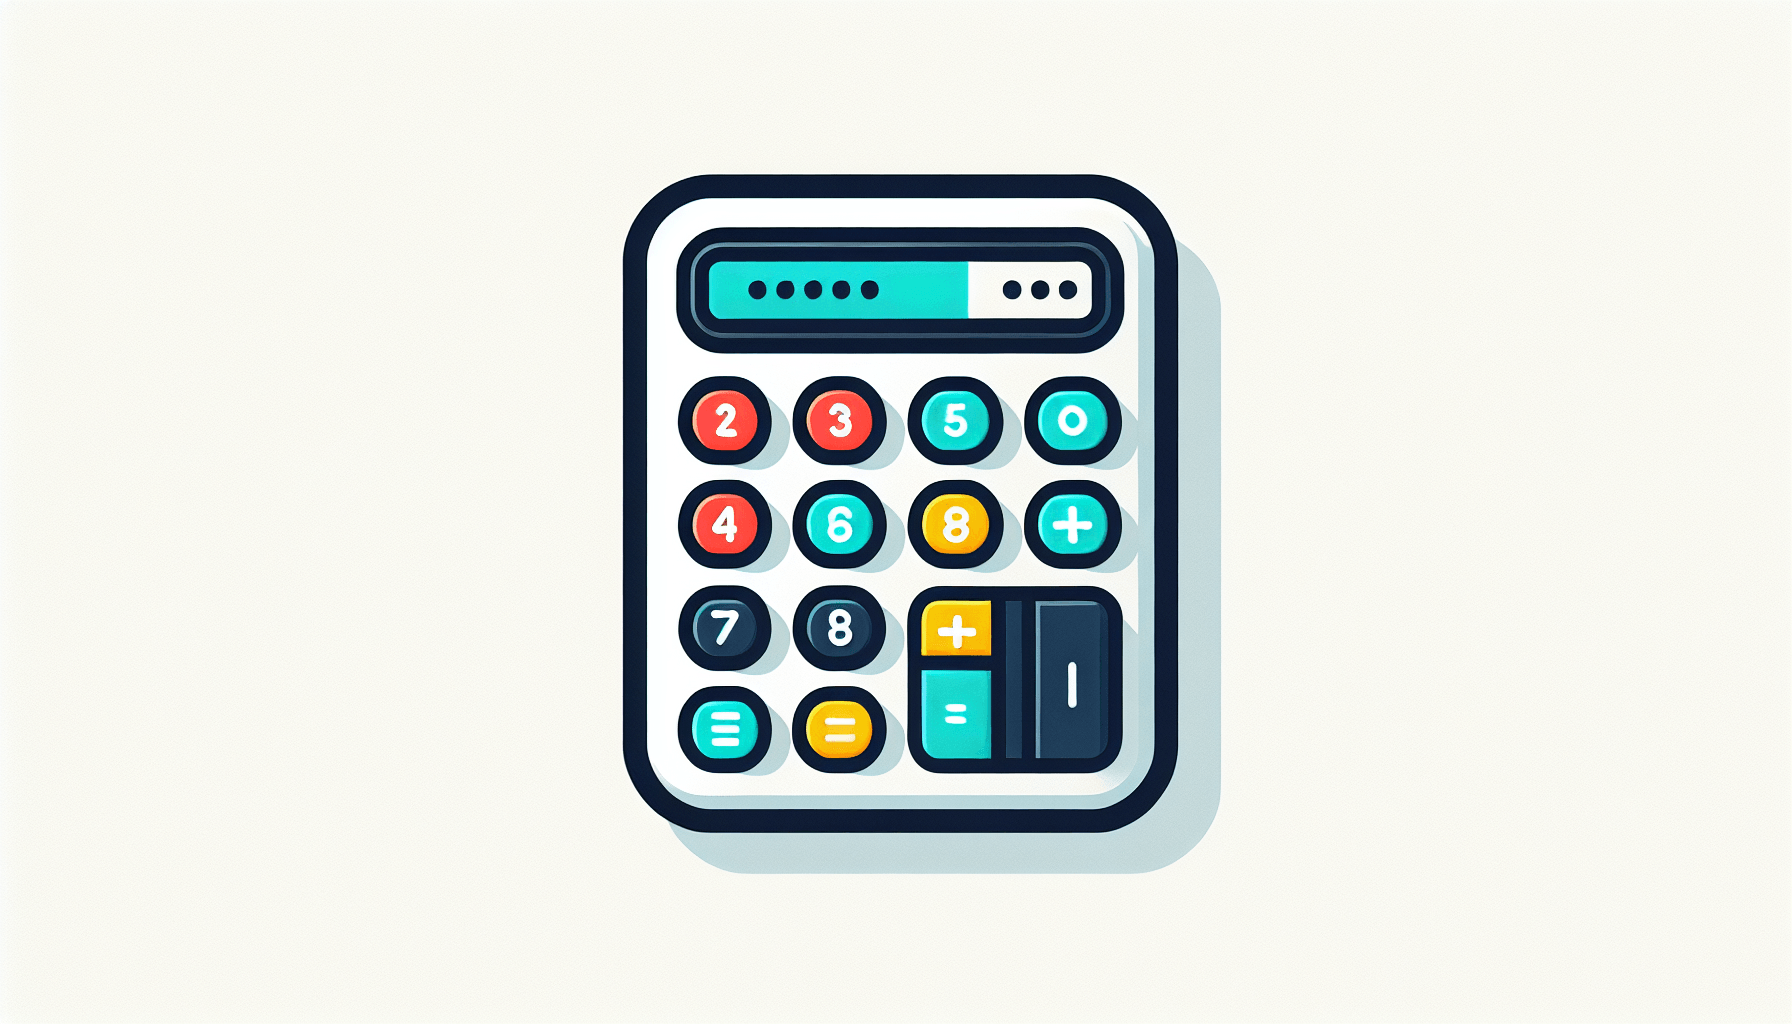 Calculator in flat illustration style and white background, red #f47574, green #88c7a8, yellow #fcc44b, and blue #645bc8 colors.